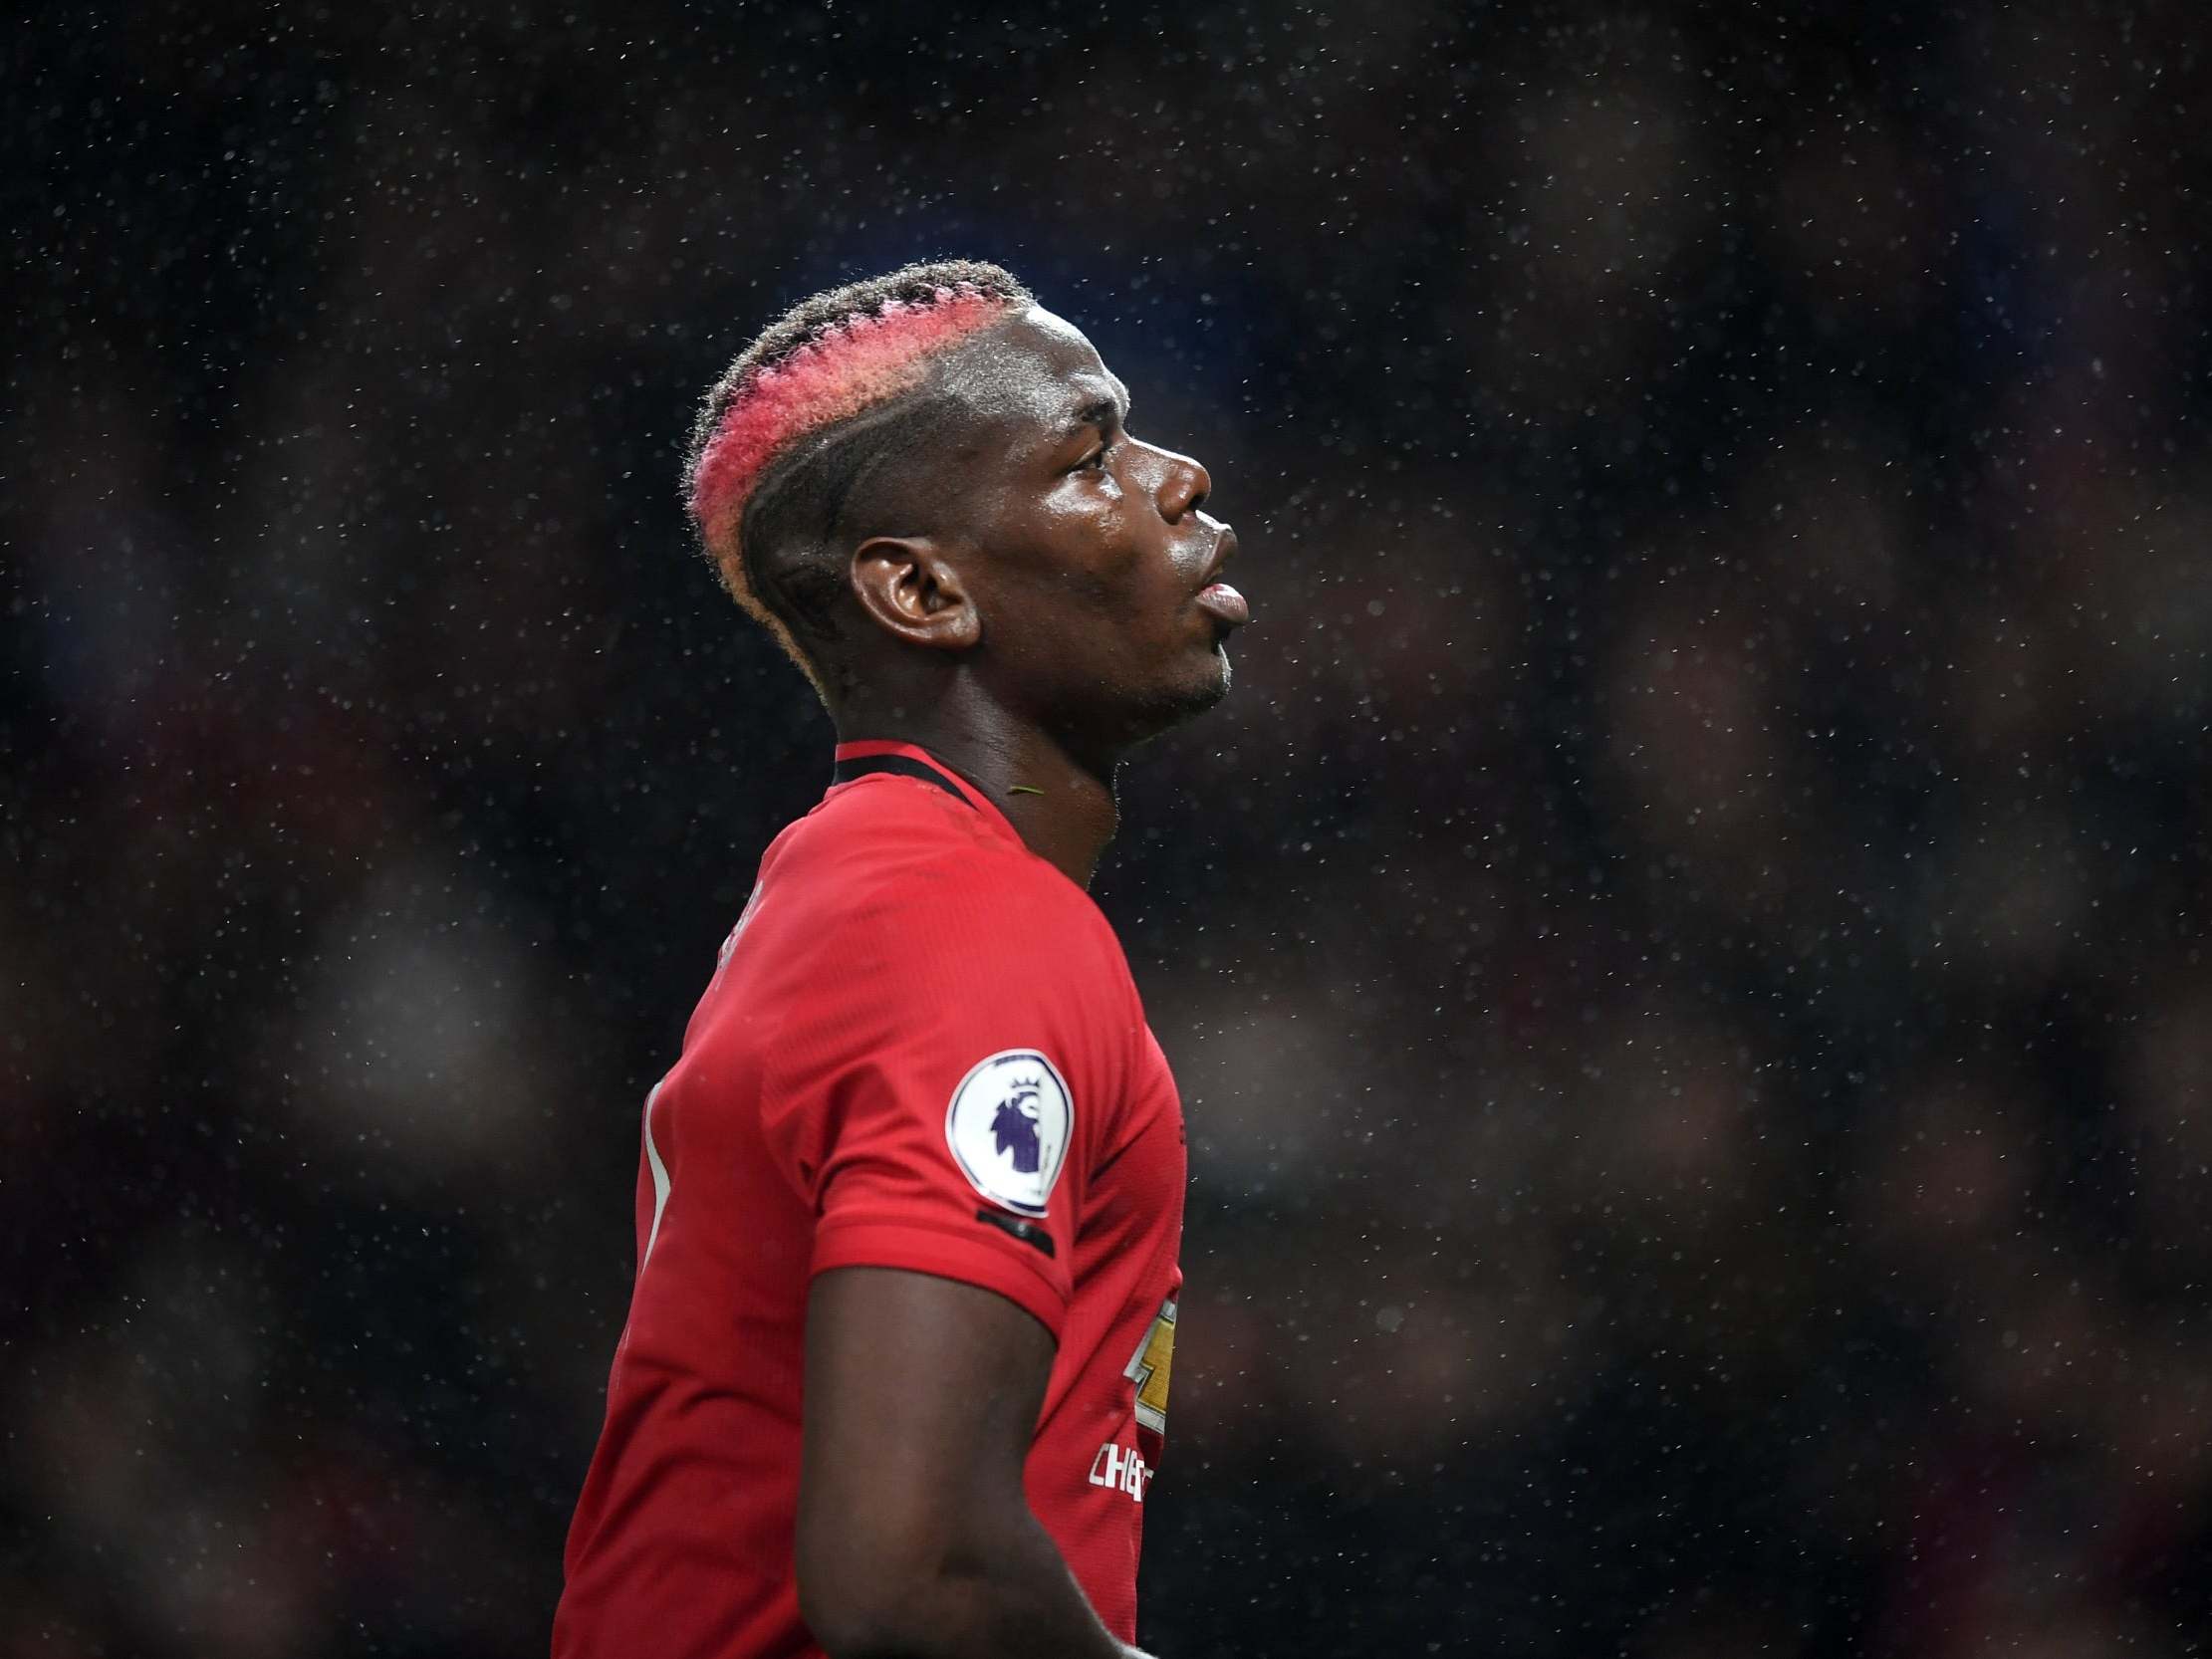 Pogba will miss Sunday’s game against Liverpool